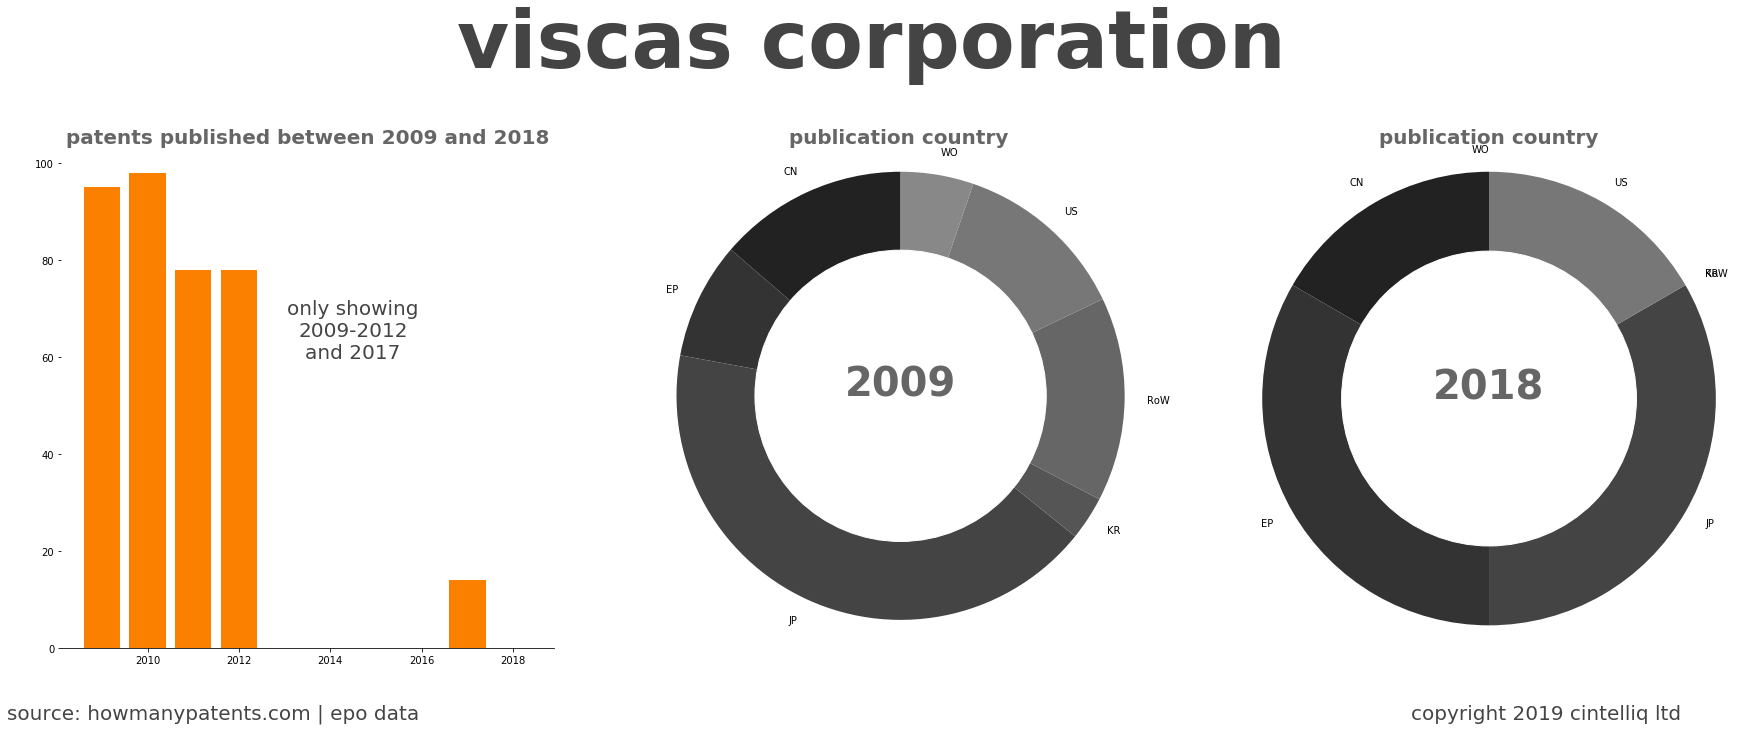 summary of patents for Viscas Corporation